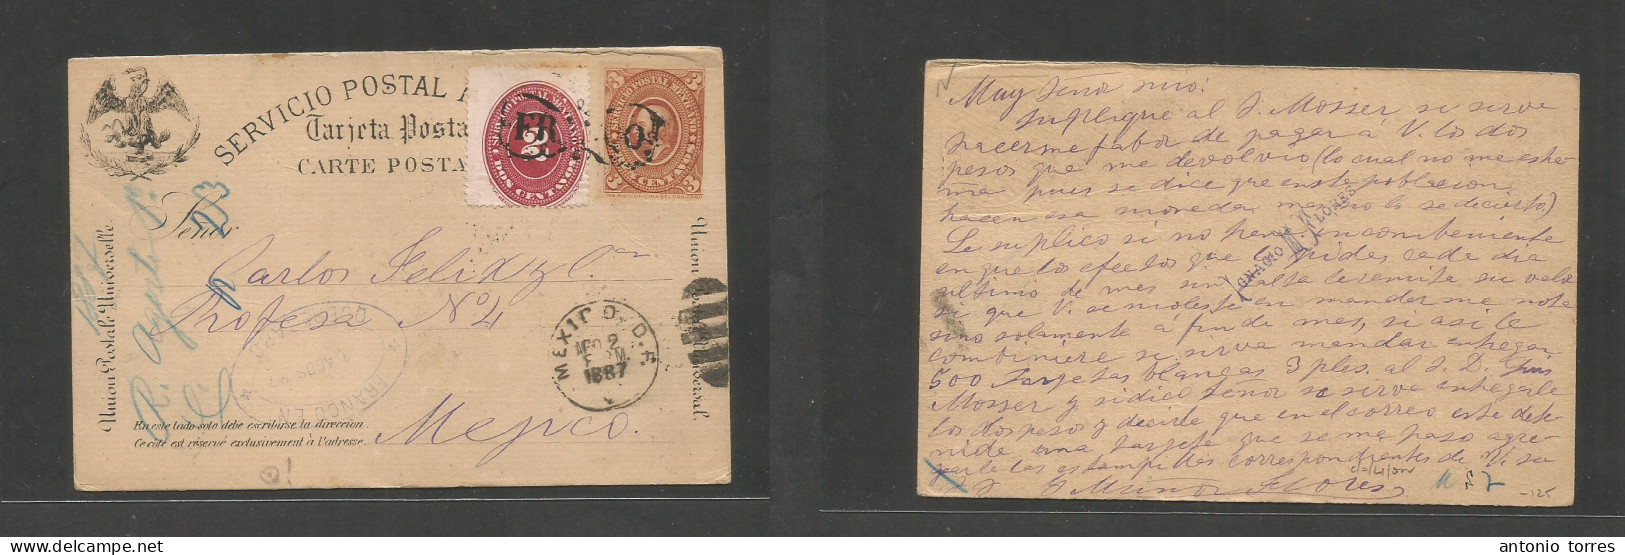 Mexico - Stationery. 1887 (1 Aug) Queretaro - DF (2 Aug) 3c Brown Medalion Stat Card + 2c Red Numeral Adtl, Tied Smashin - Mexico